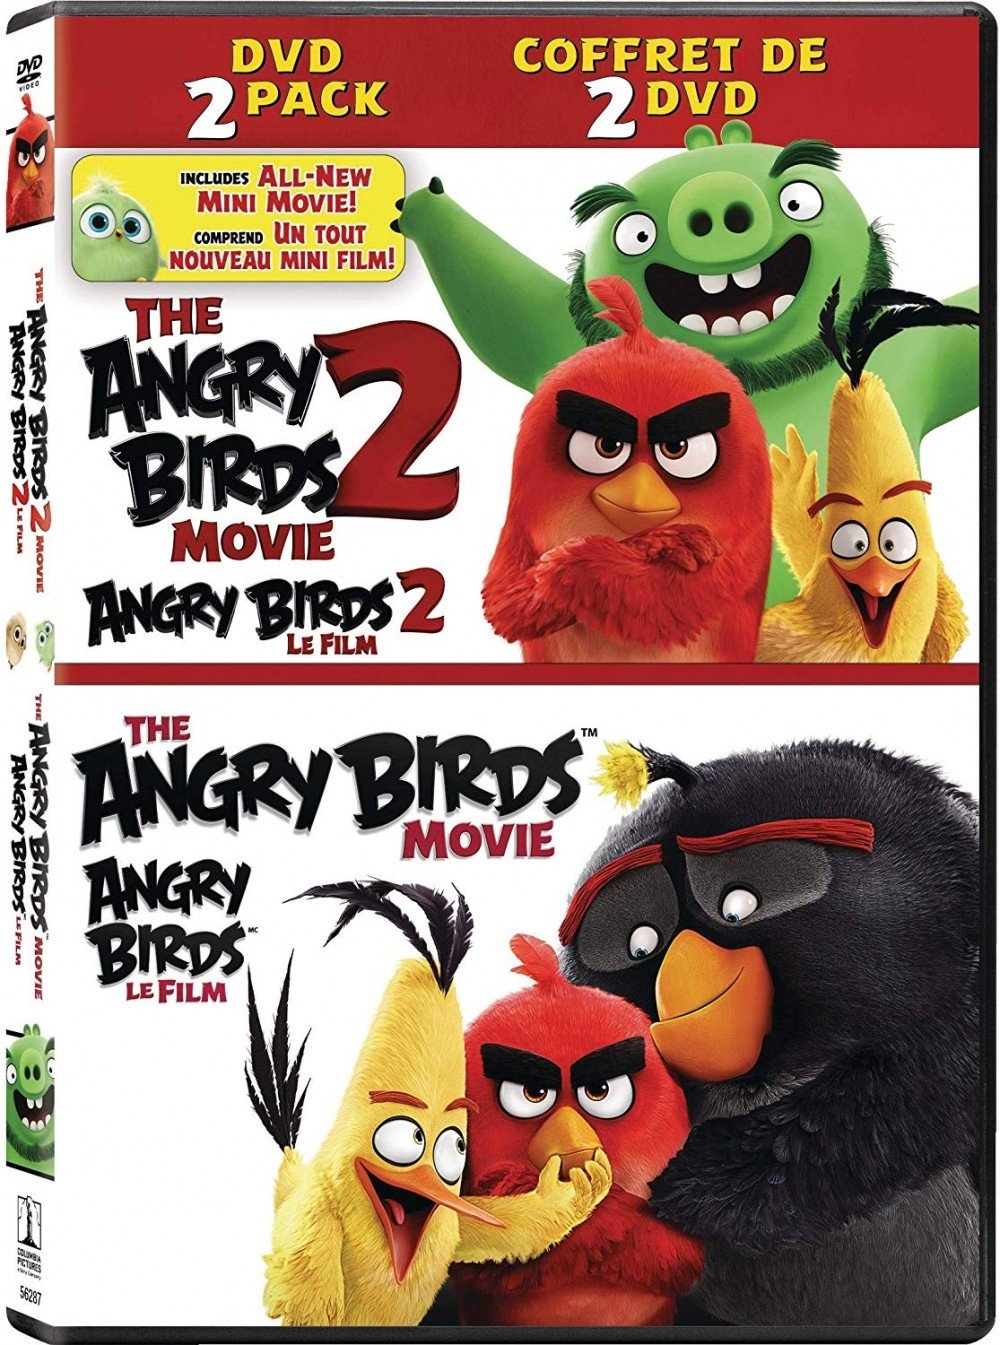 Angry Birds 1 Filmul + Angry Birds 2 Filmul (Colectie 2 DVD-uri) / The Angry Birds 1+2 Movie Collection